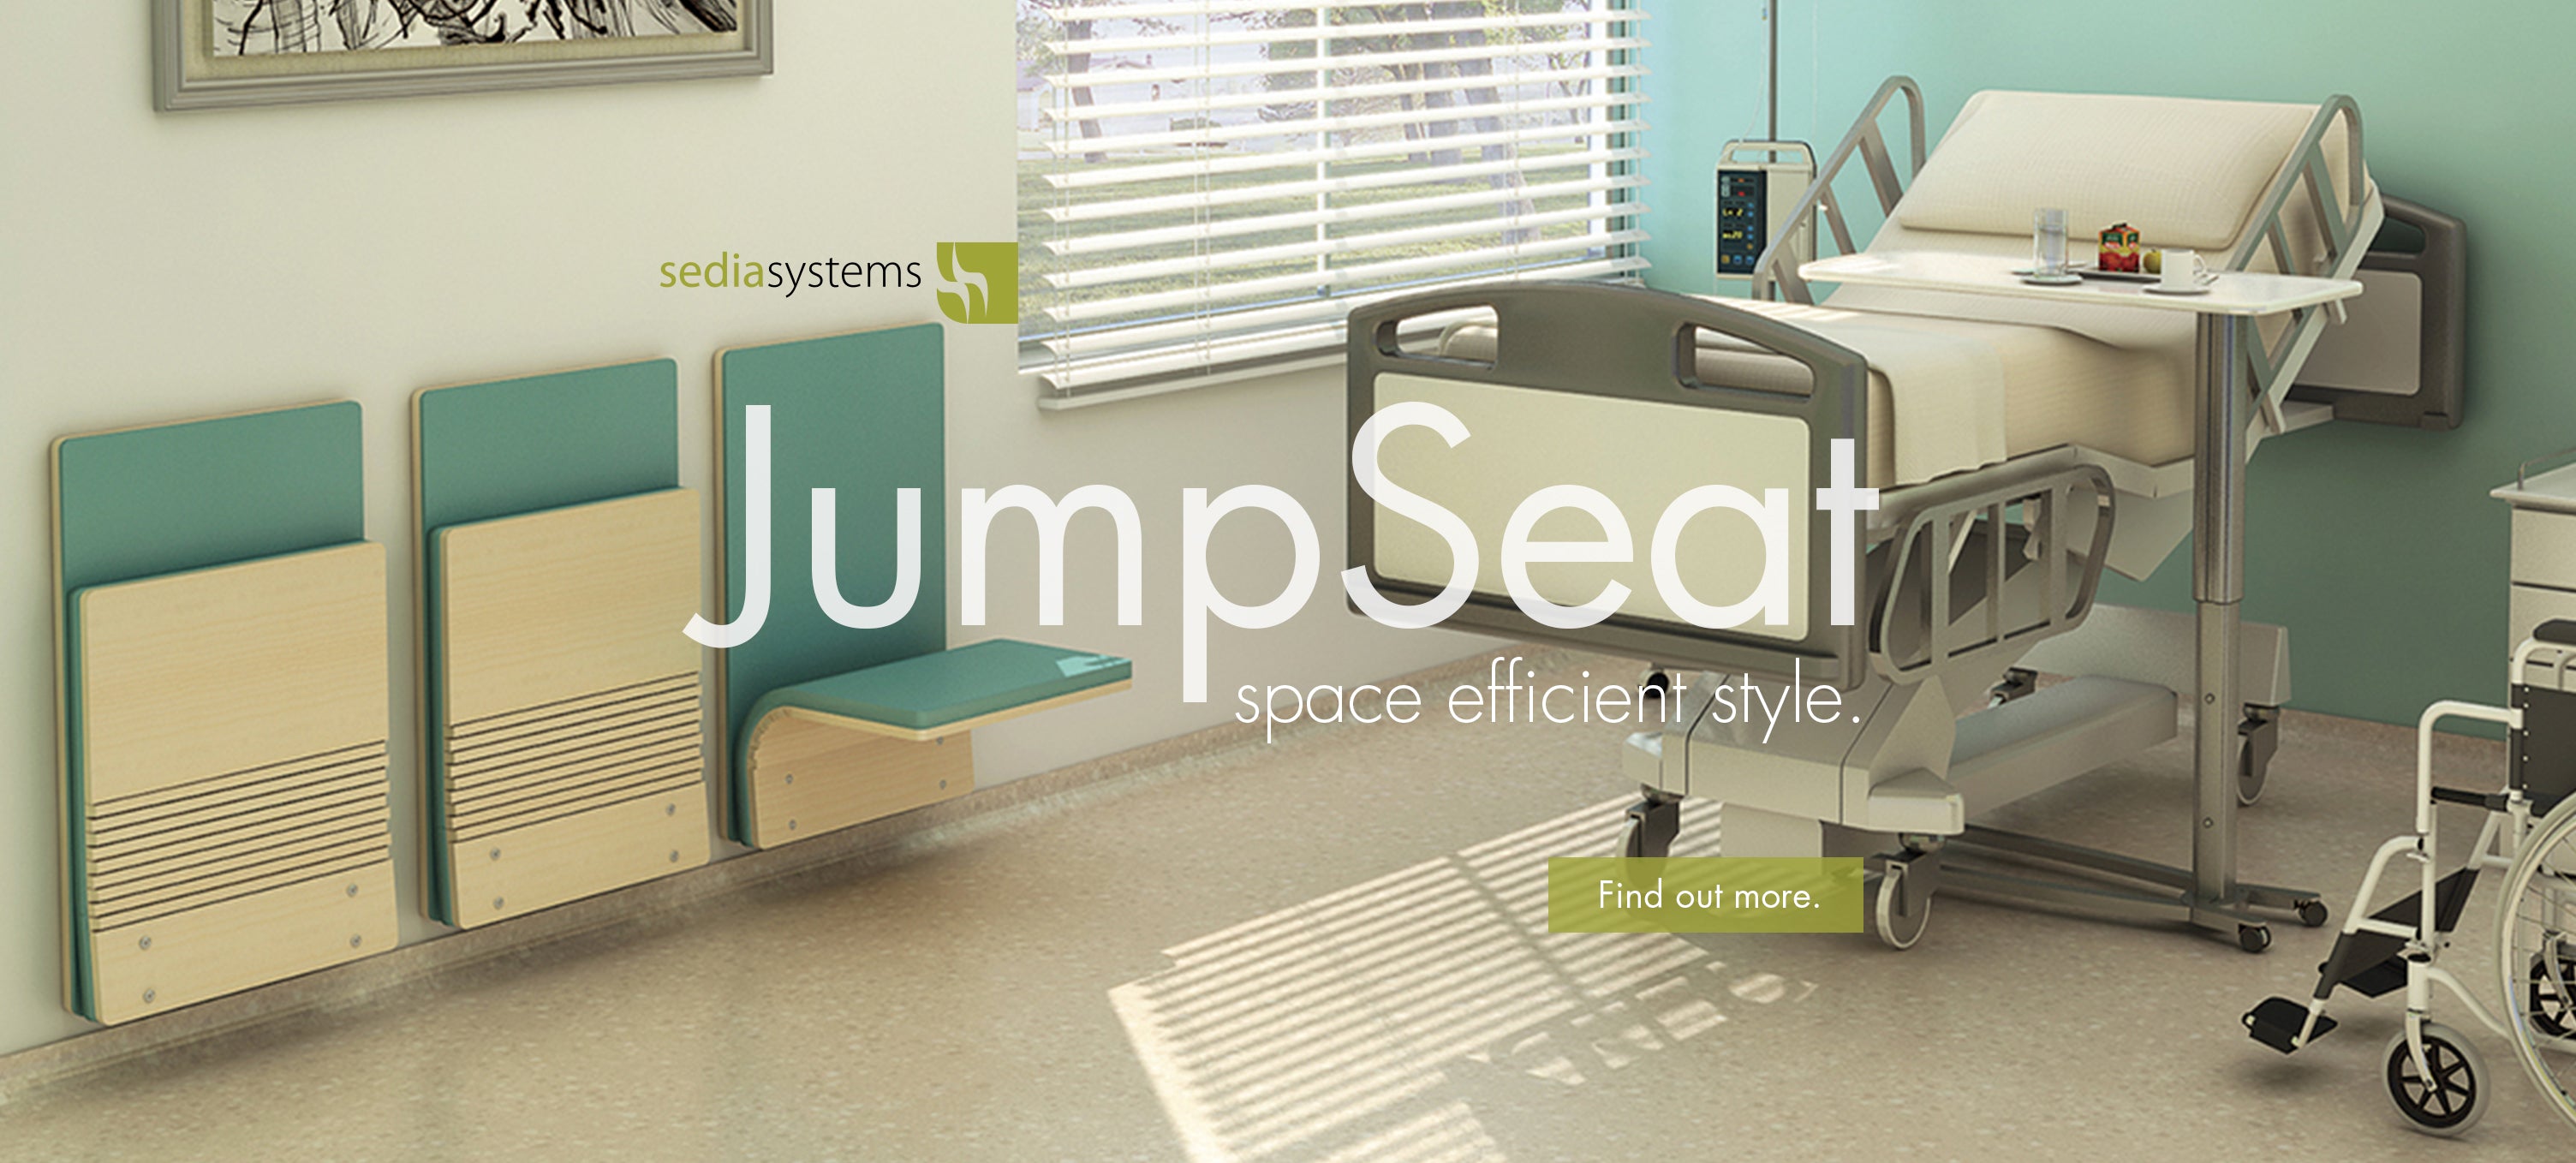 Sedia Systems Jump Seat health care seating